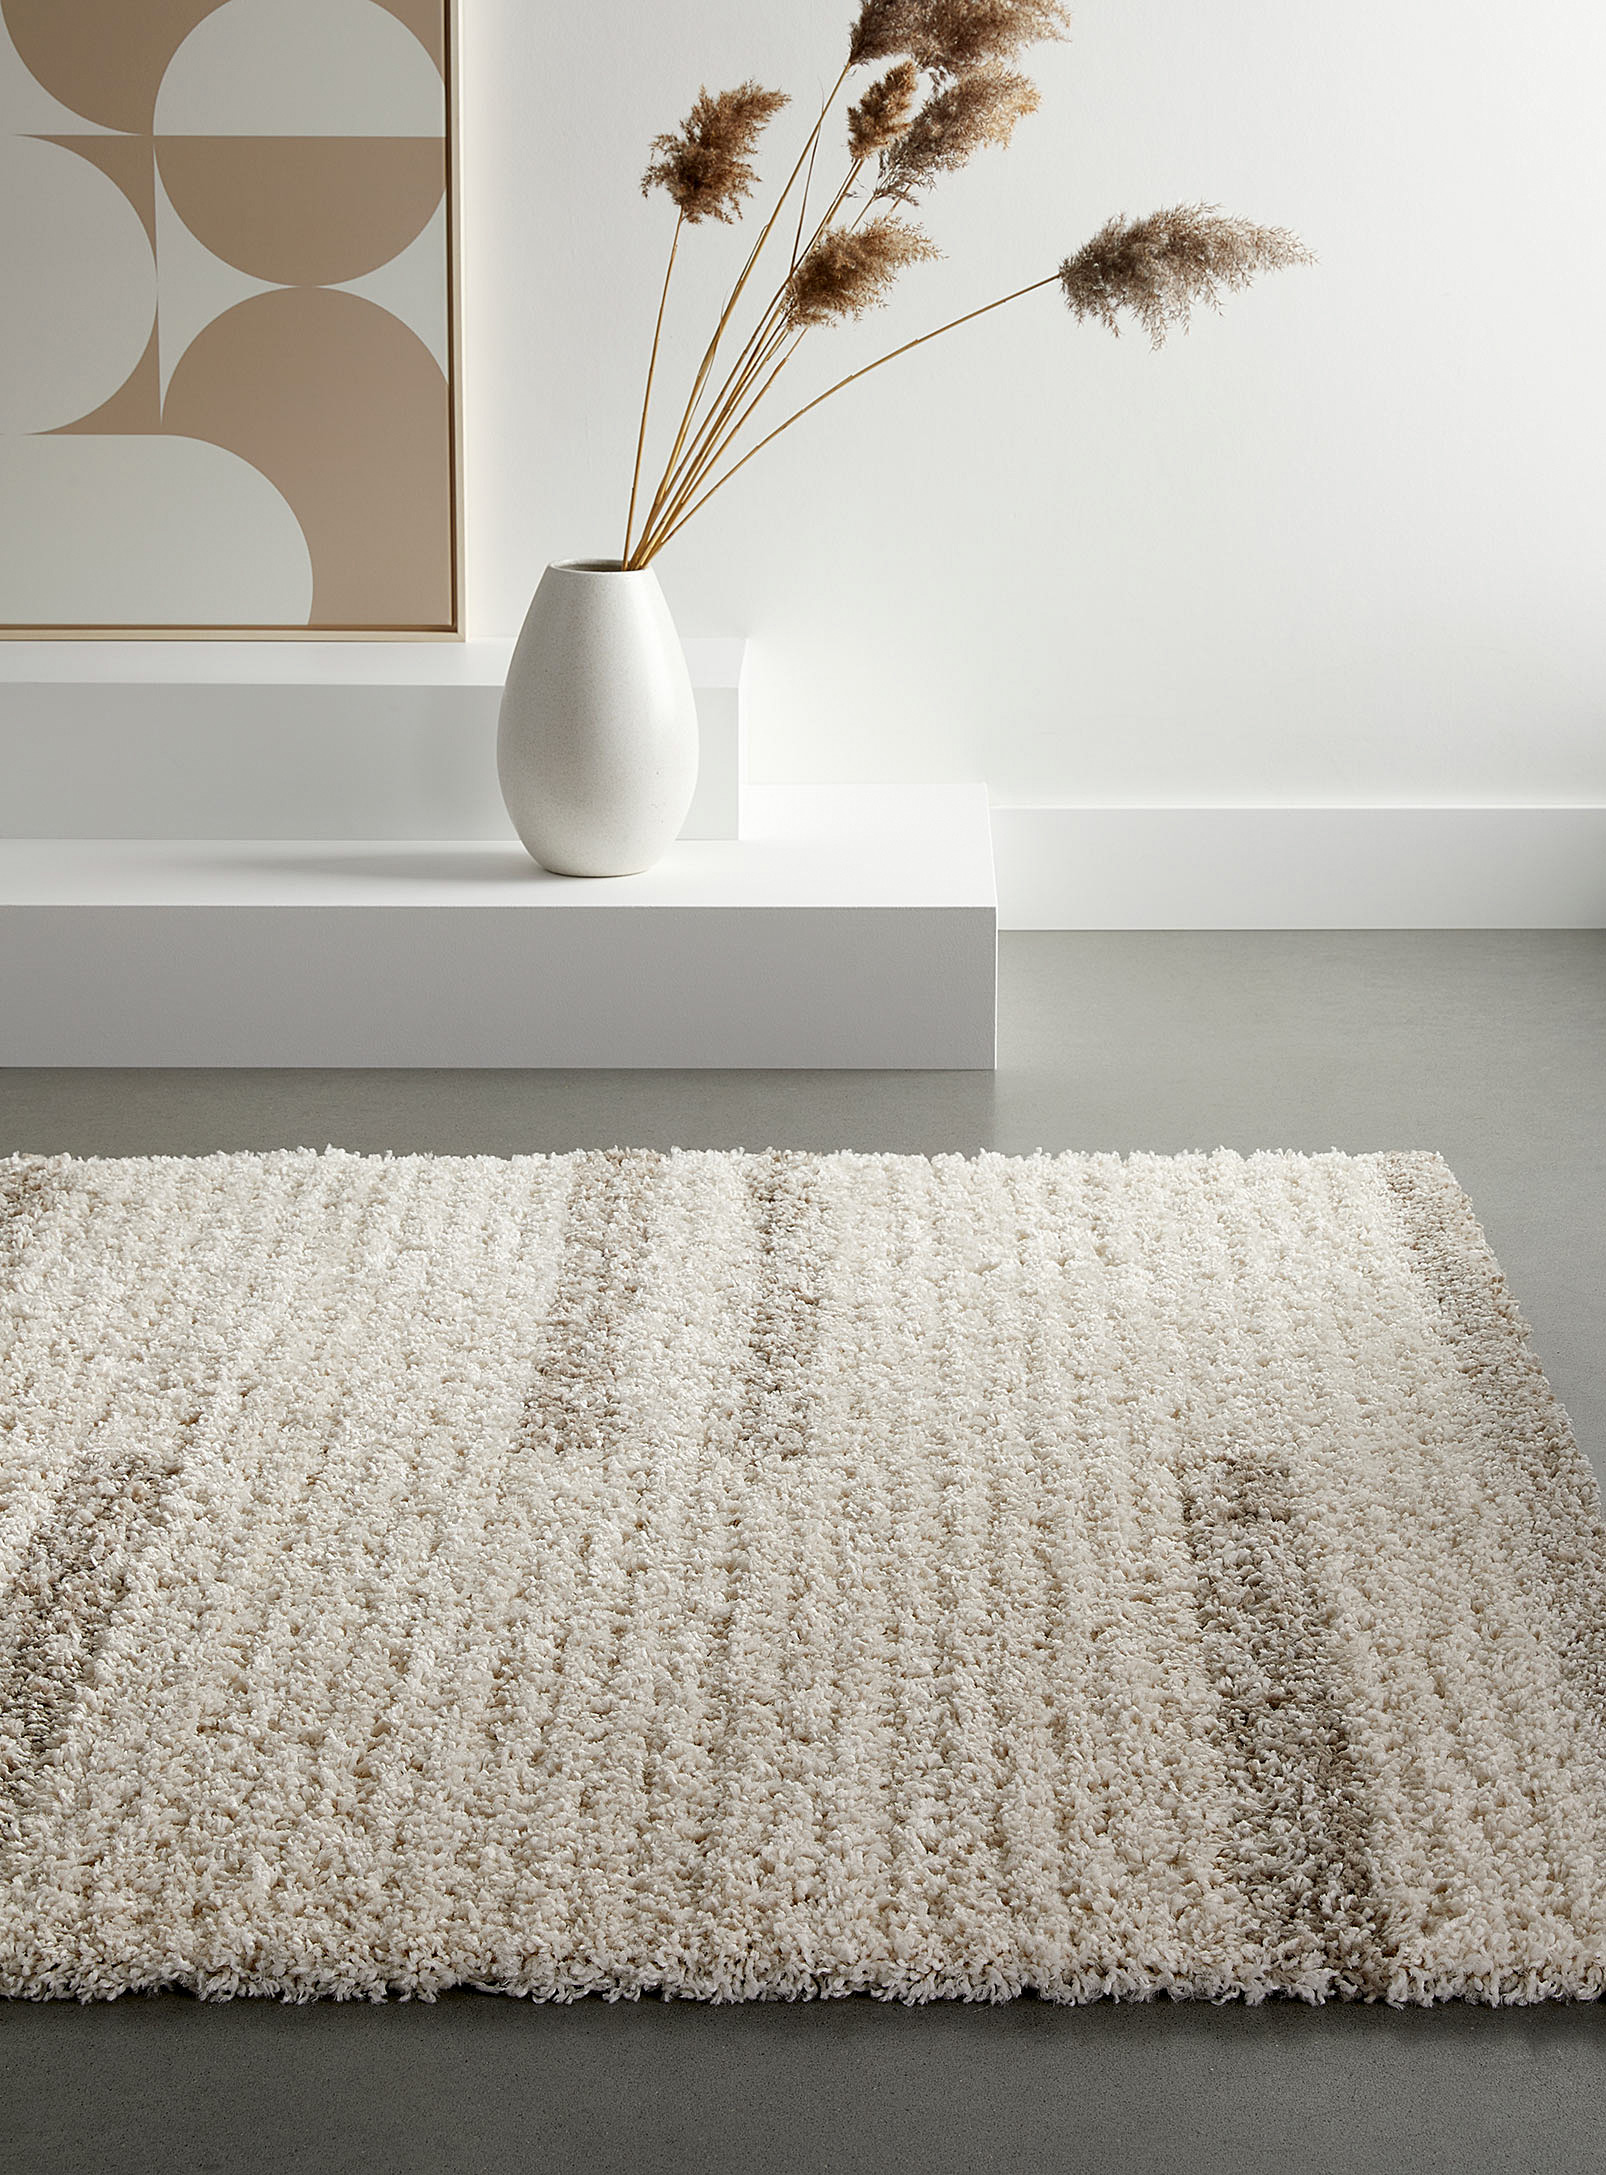 Simons Maison - Accent stripes ribbed shag rug See available sizes